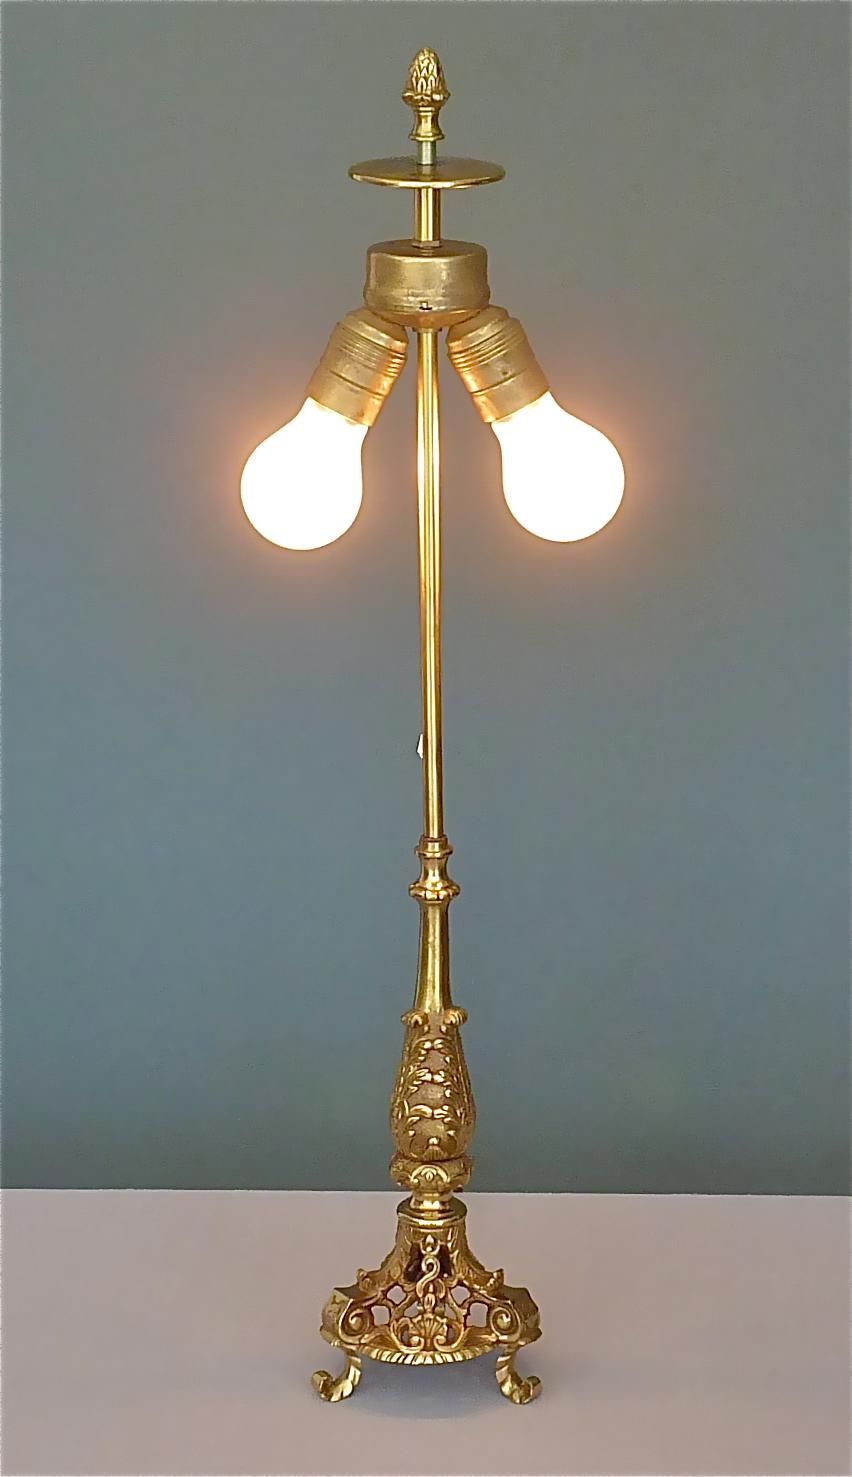 Large Rococo Baroque Maison Jansen Style Floral Table Lamp Patinated Brass 1950s For Sale 3